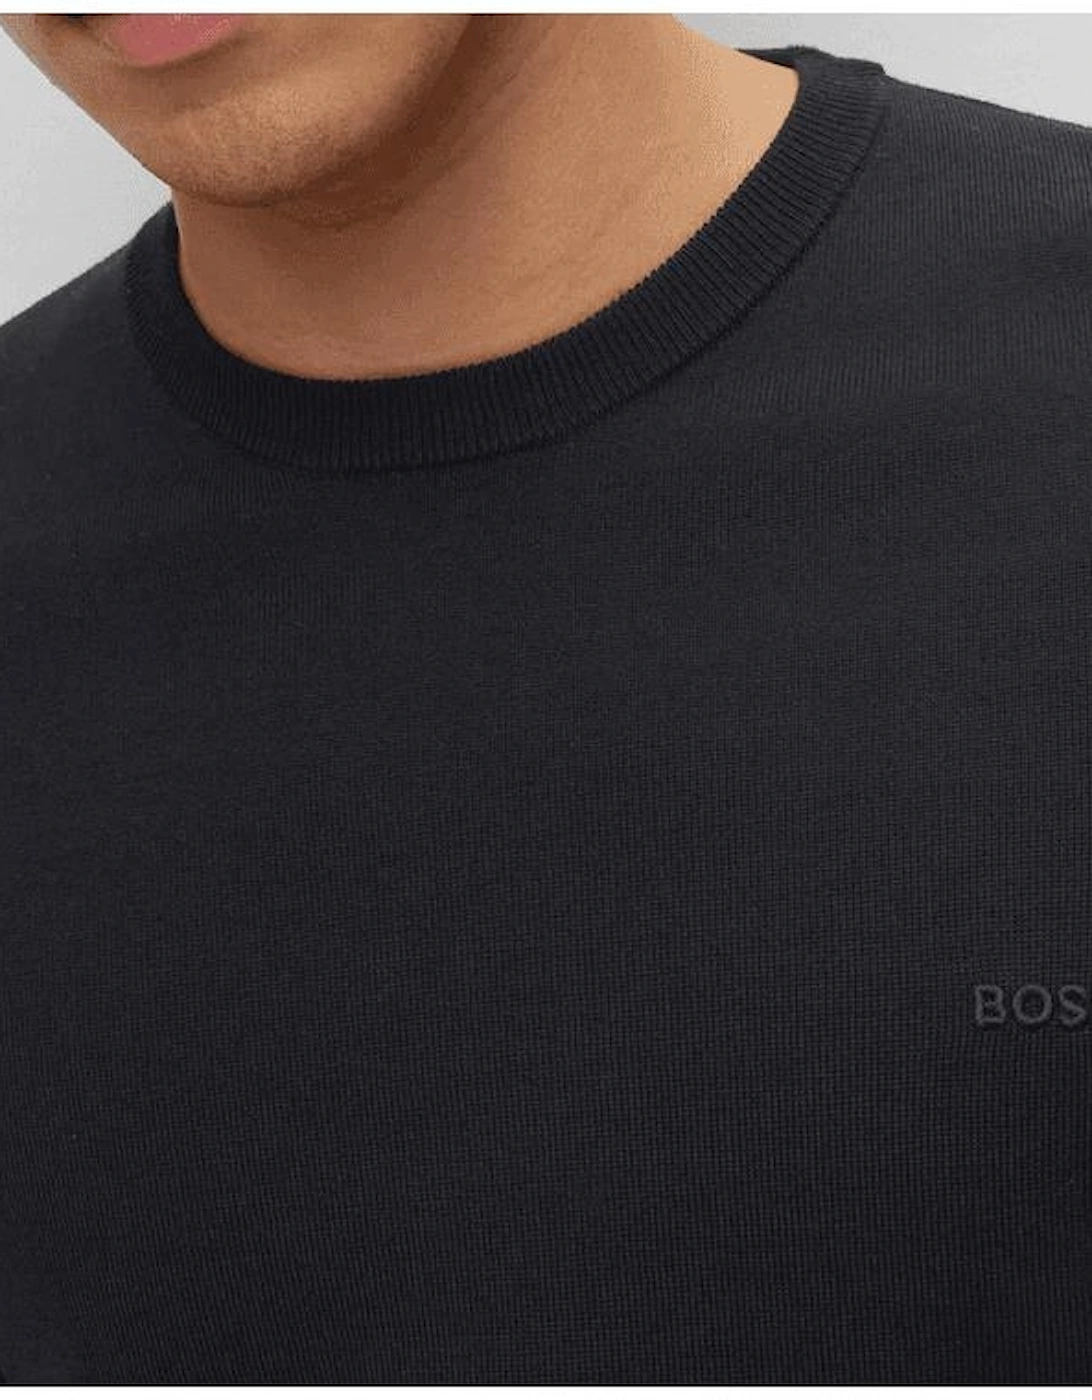 Botto Embroidered Logo Crew Neck Black Knitted Jumper